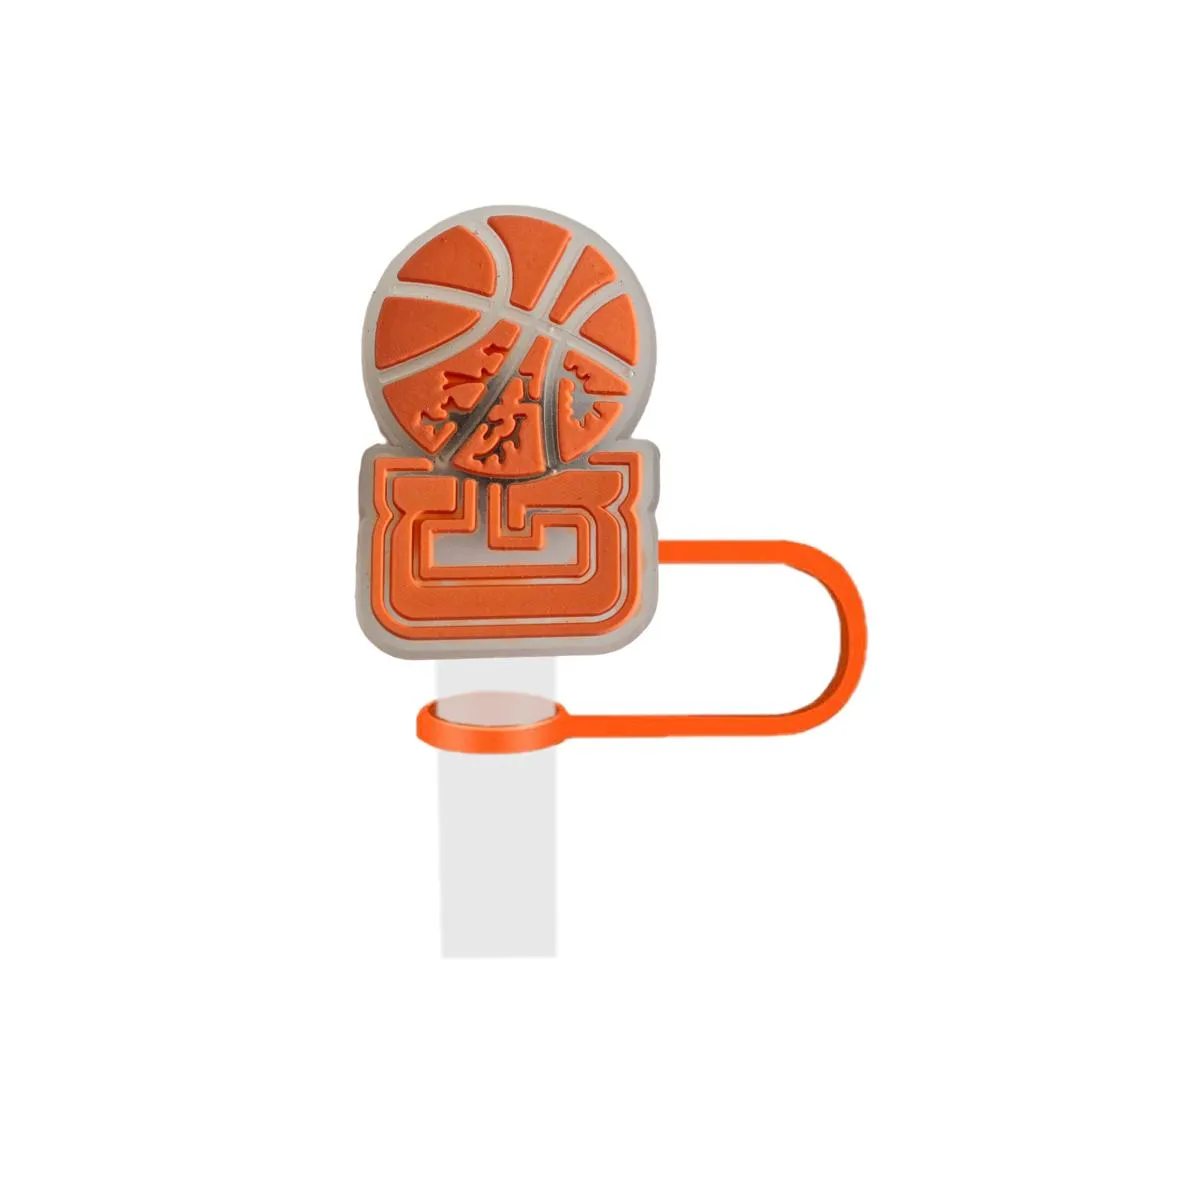 fluorescent basketball park 10 straw cover for  cups dust-proof tips protectors 0.4 in/10mm straws accessories suitable traveling picnicking